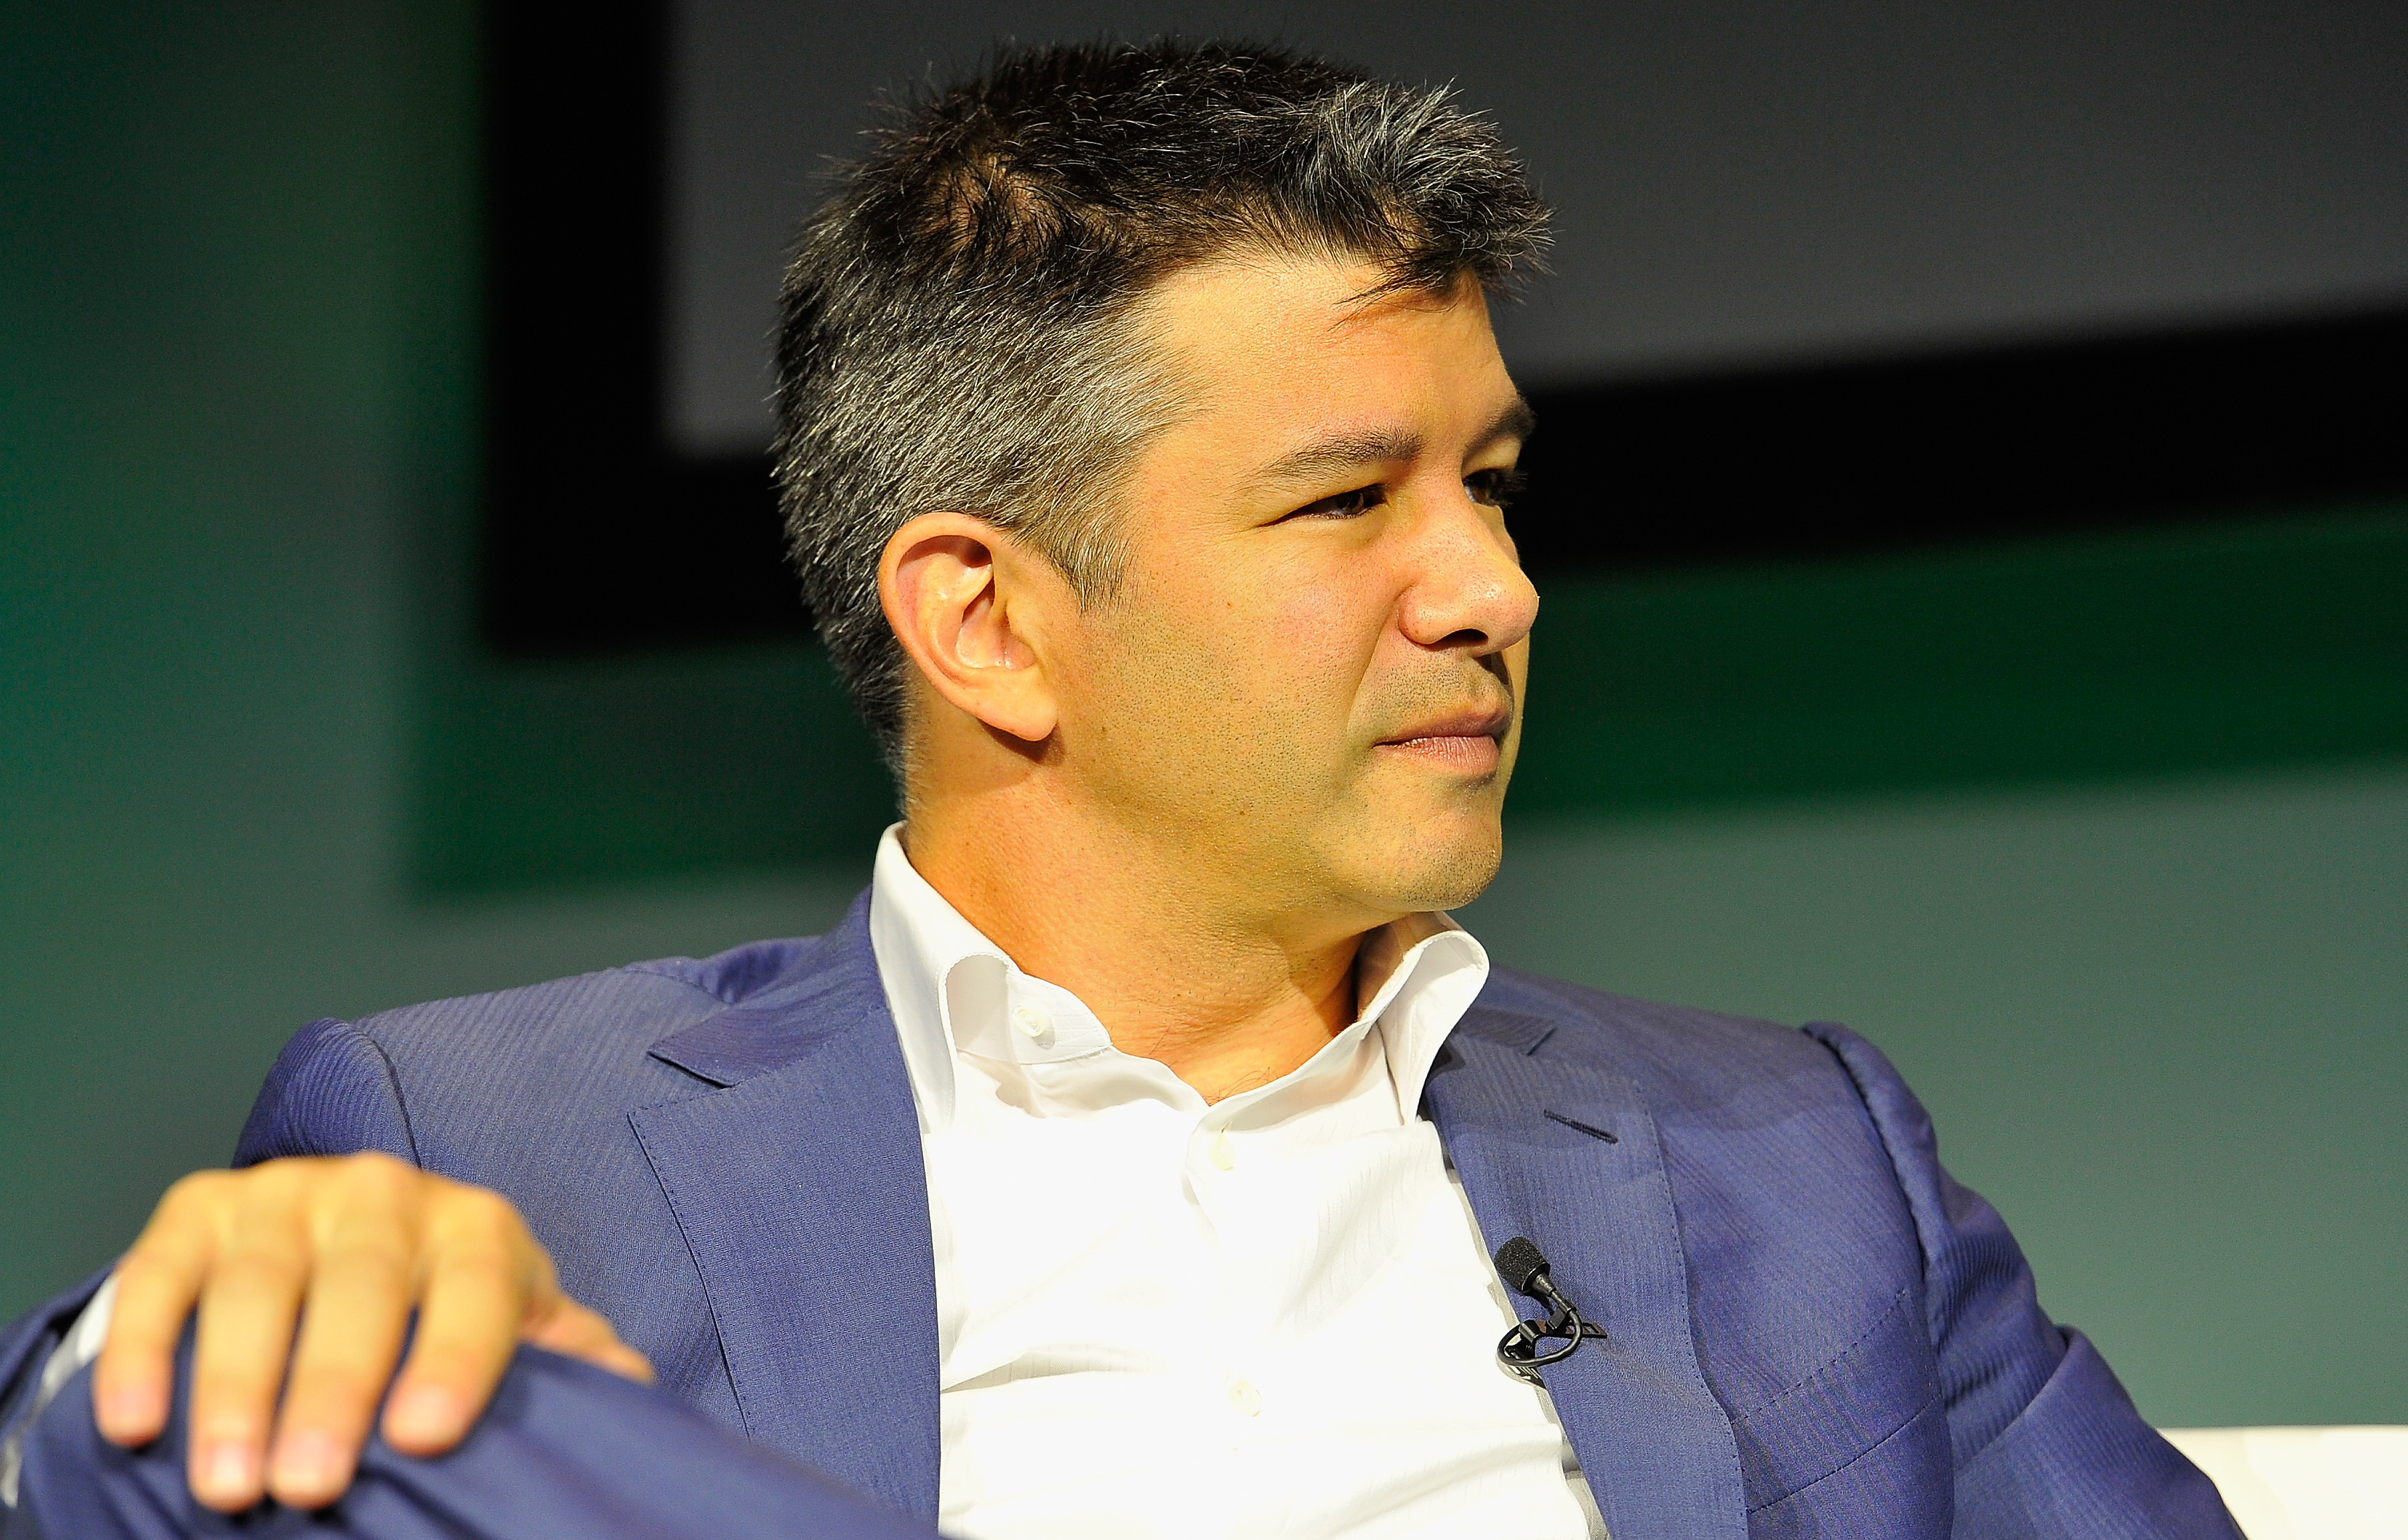 Uber chief Travis Kalanick has agreed the company will create and fund a driver’s association as part of a recent class action settlement.